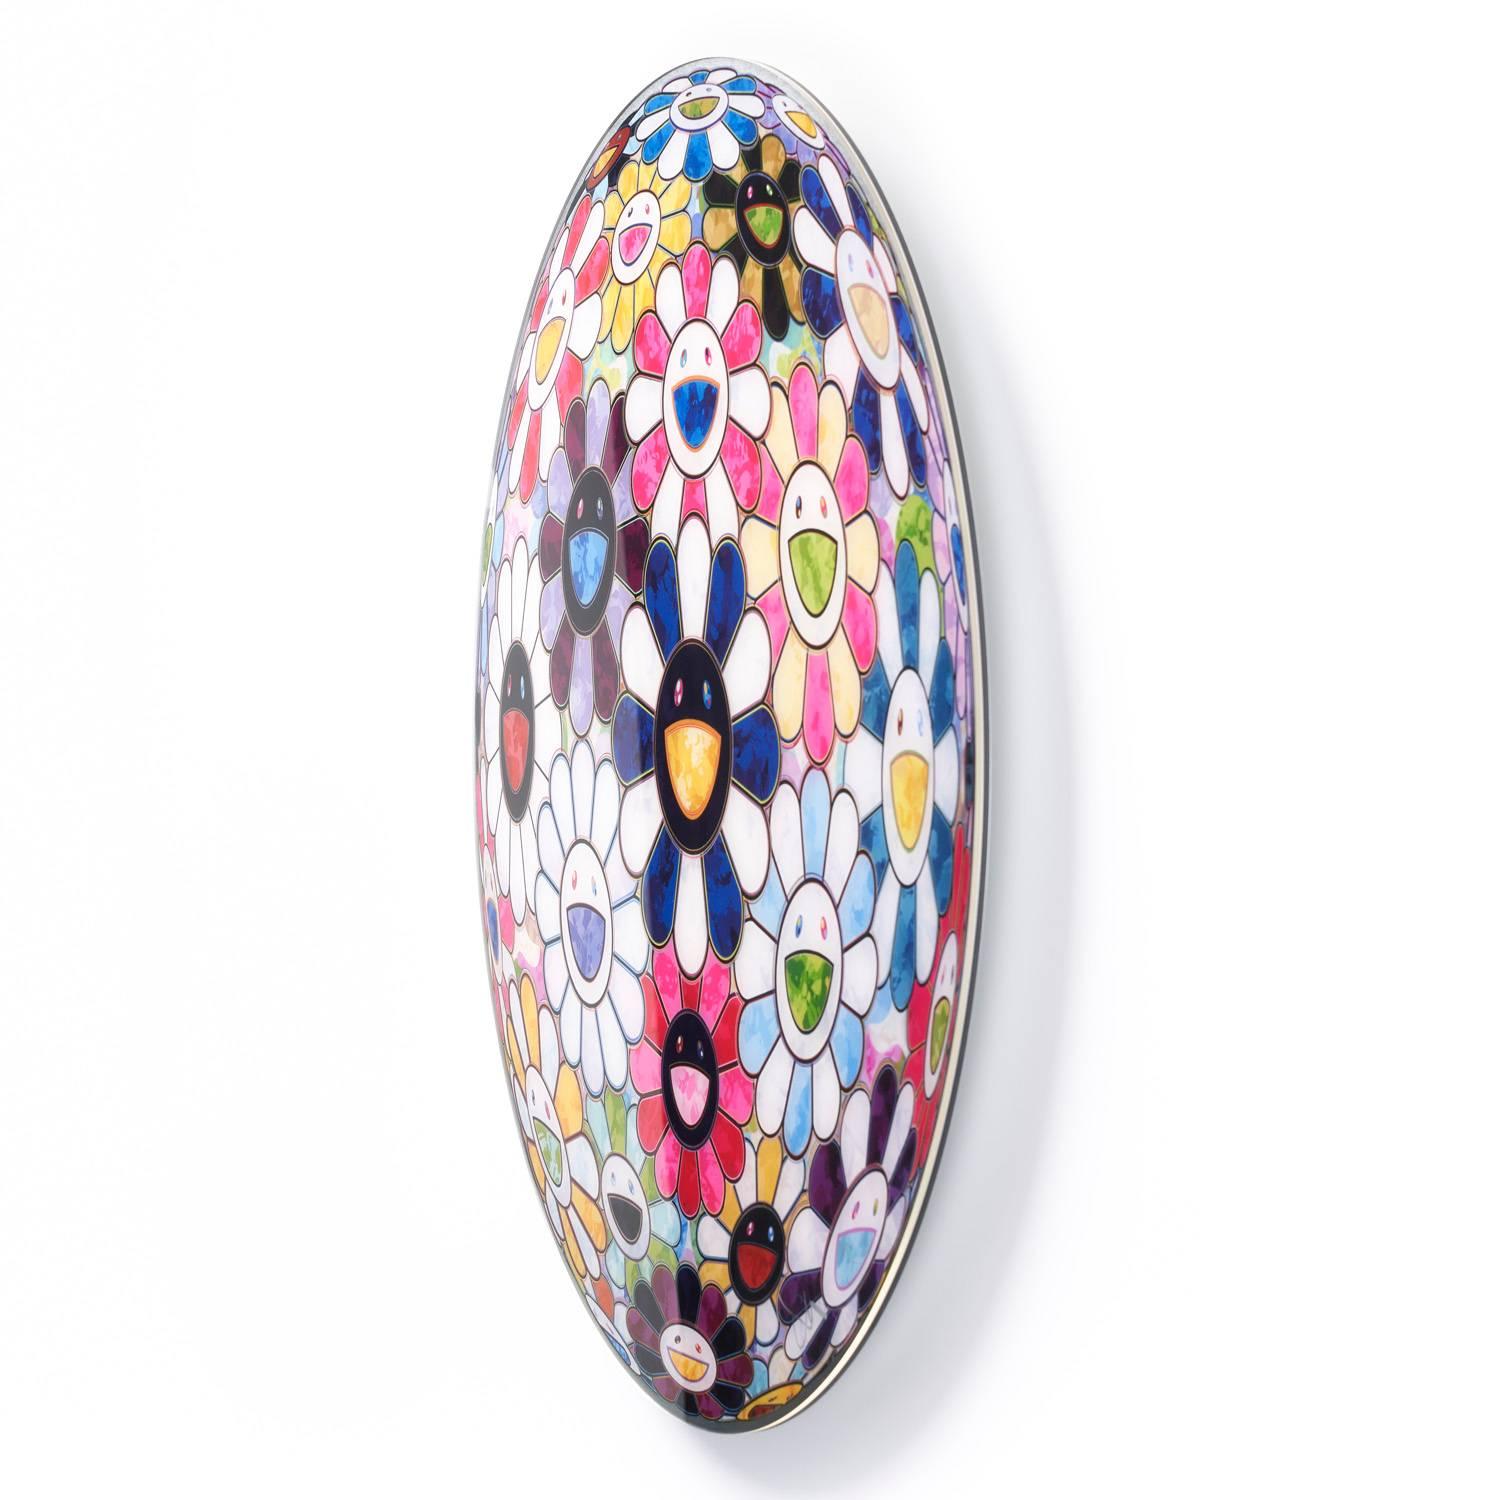 Right There: The Breath of the Human Heart - Print by Takashi Murakami